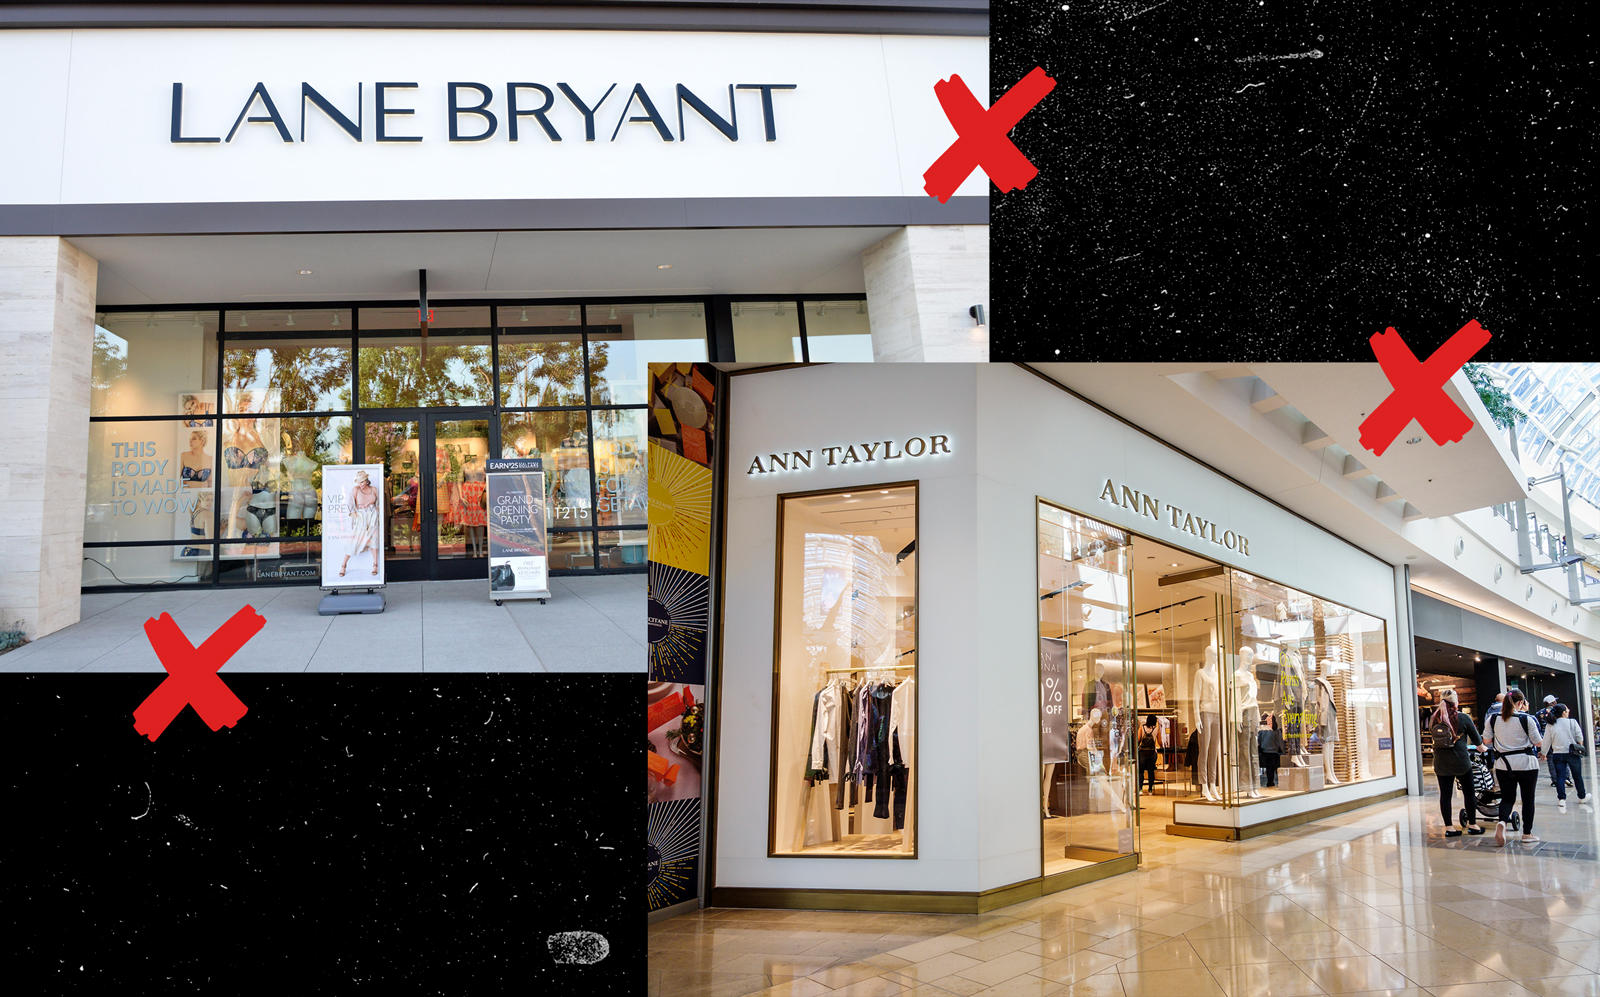 Lane Bryant and Ann Taylor stores (Getty)